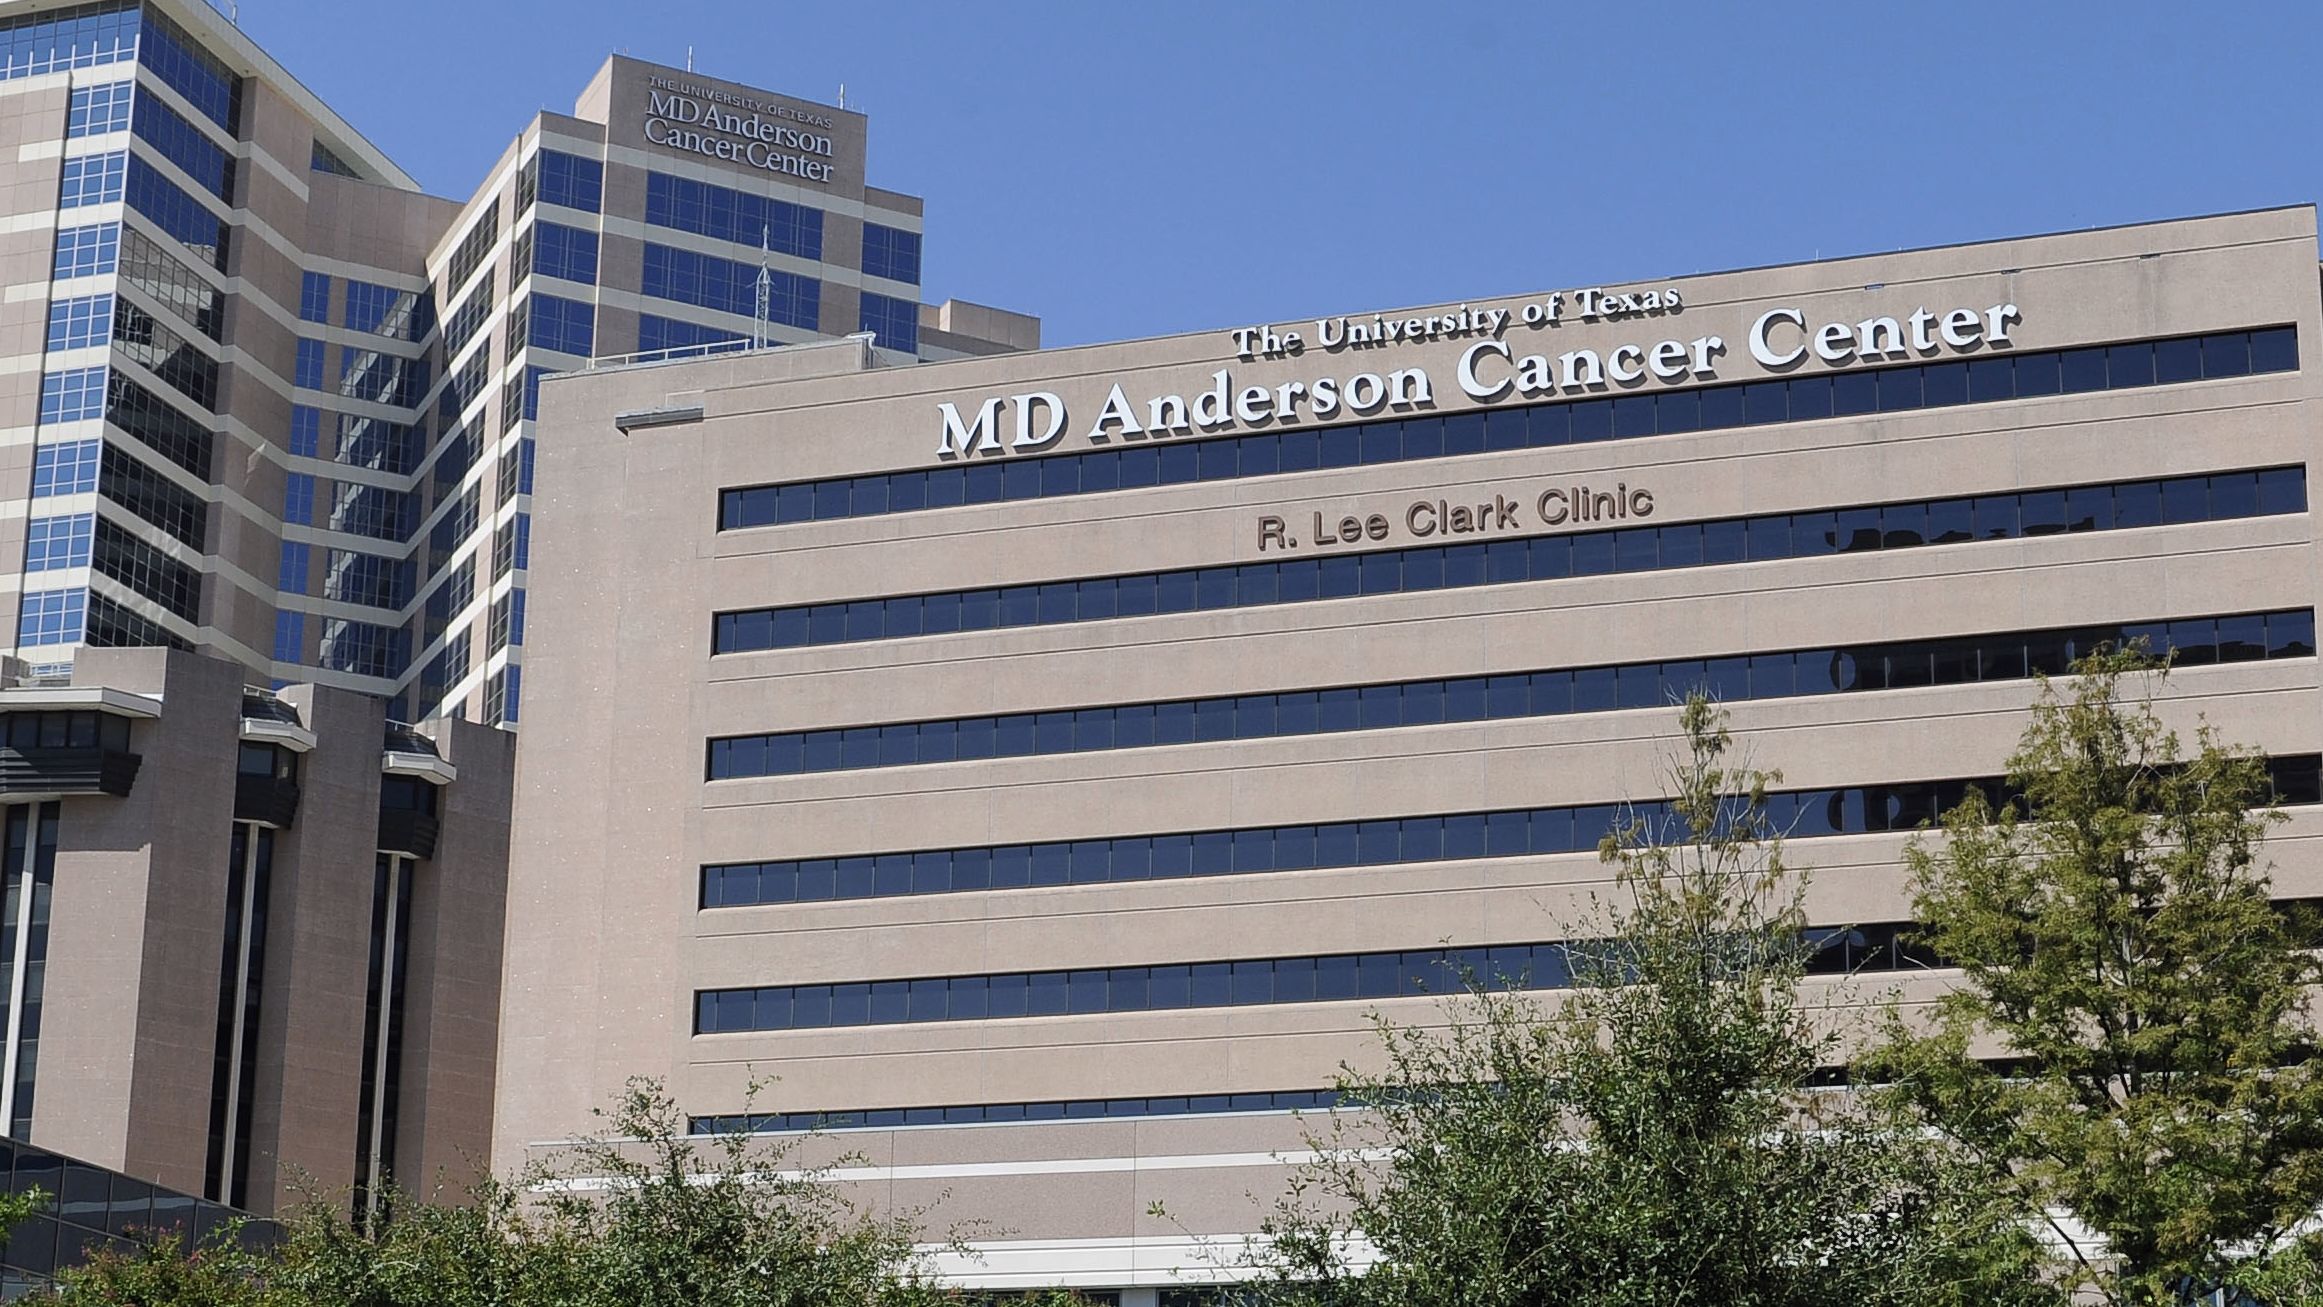 The University of Texas MD Anderson Cancer Center is one of dozens of institutions that have been contacted by the US National Institutes of Health about foreign influence concerns.